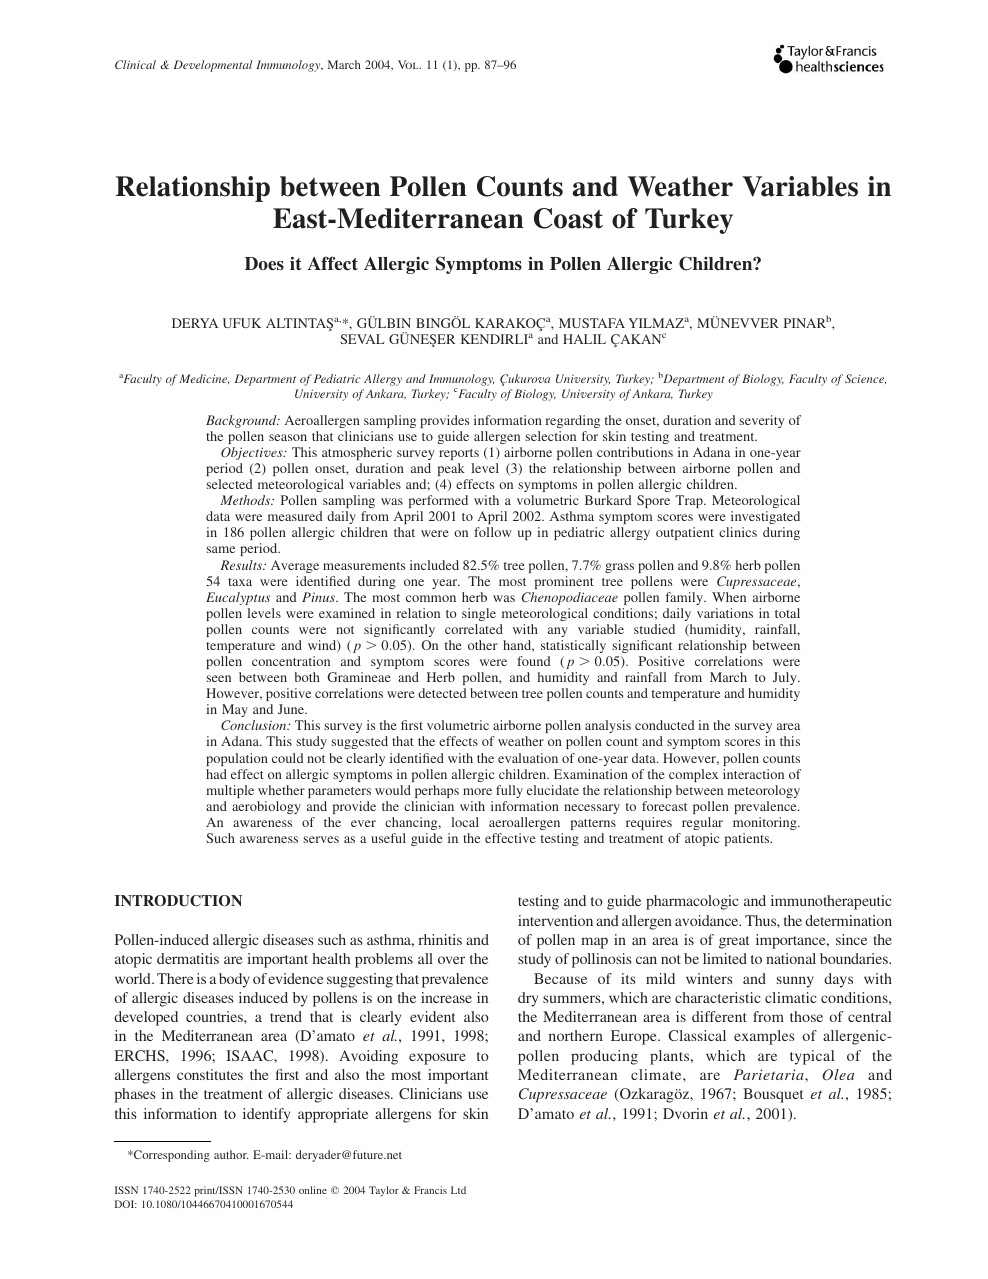 Relationship Between Pollen Counts And Weather Variables In East Mediterranean Coast Of Turkey Topic Of Research Paper In Clinical Medicine Download Scholarly Article Pdf And Read For Free On Cyberleninka Open Science